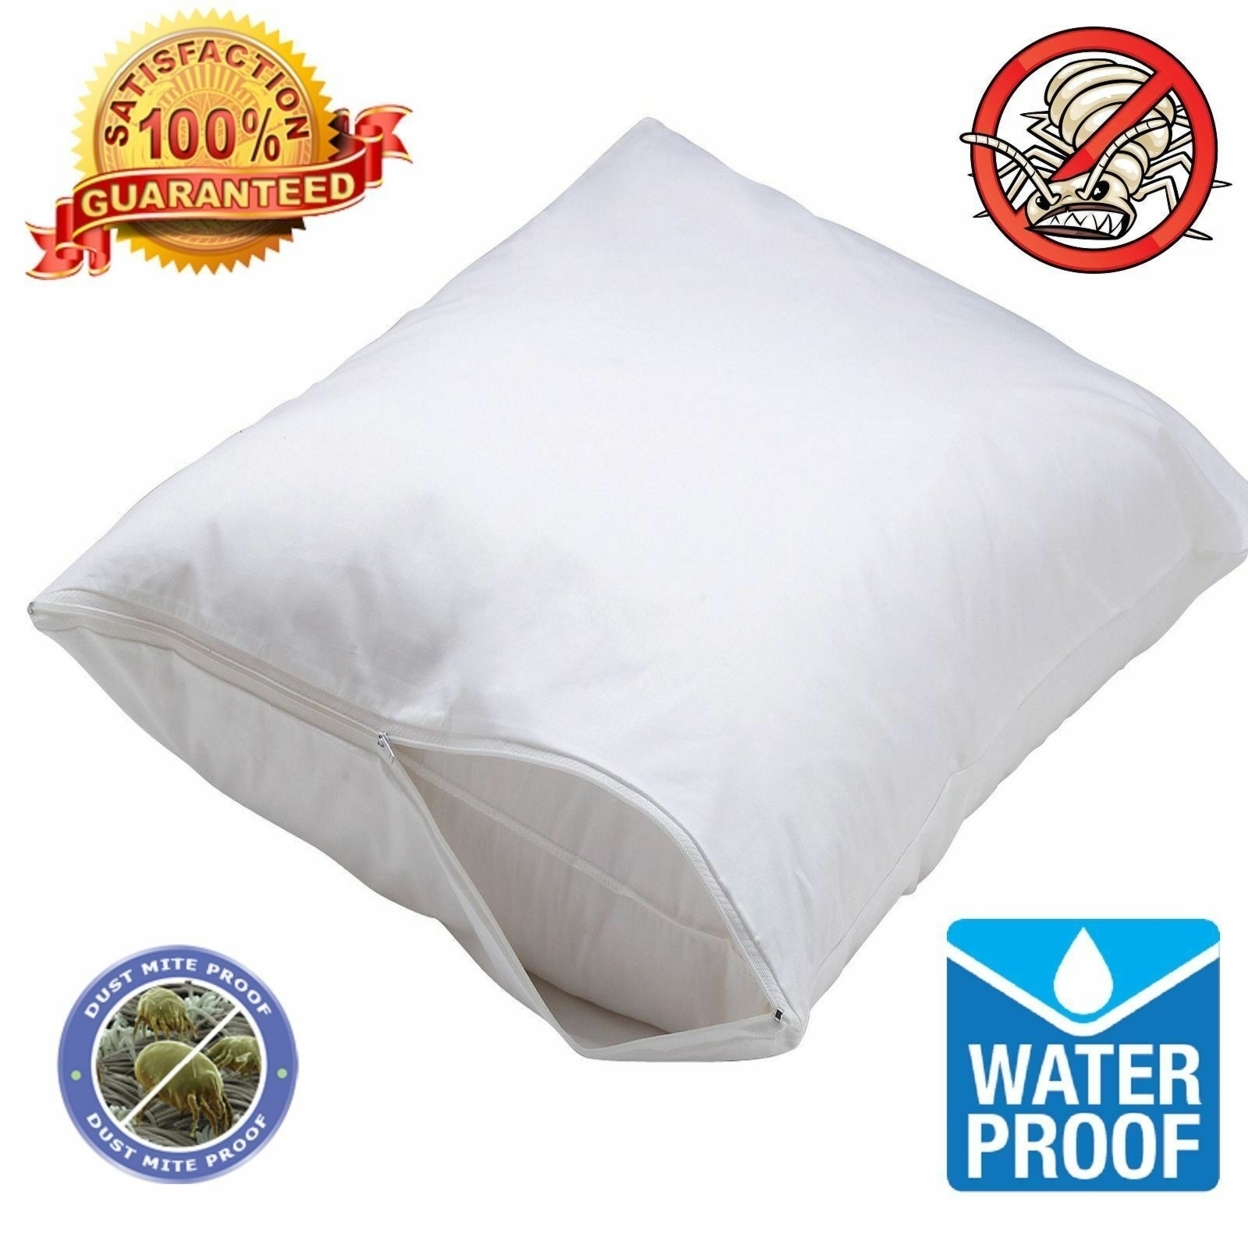 Zippered Fabric Waterproof & Bed Bug/Dust Mite Mattress Cover Protector - 2 Fabric Pillow Cases